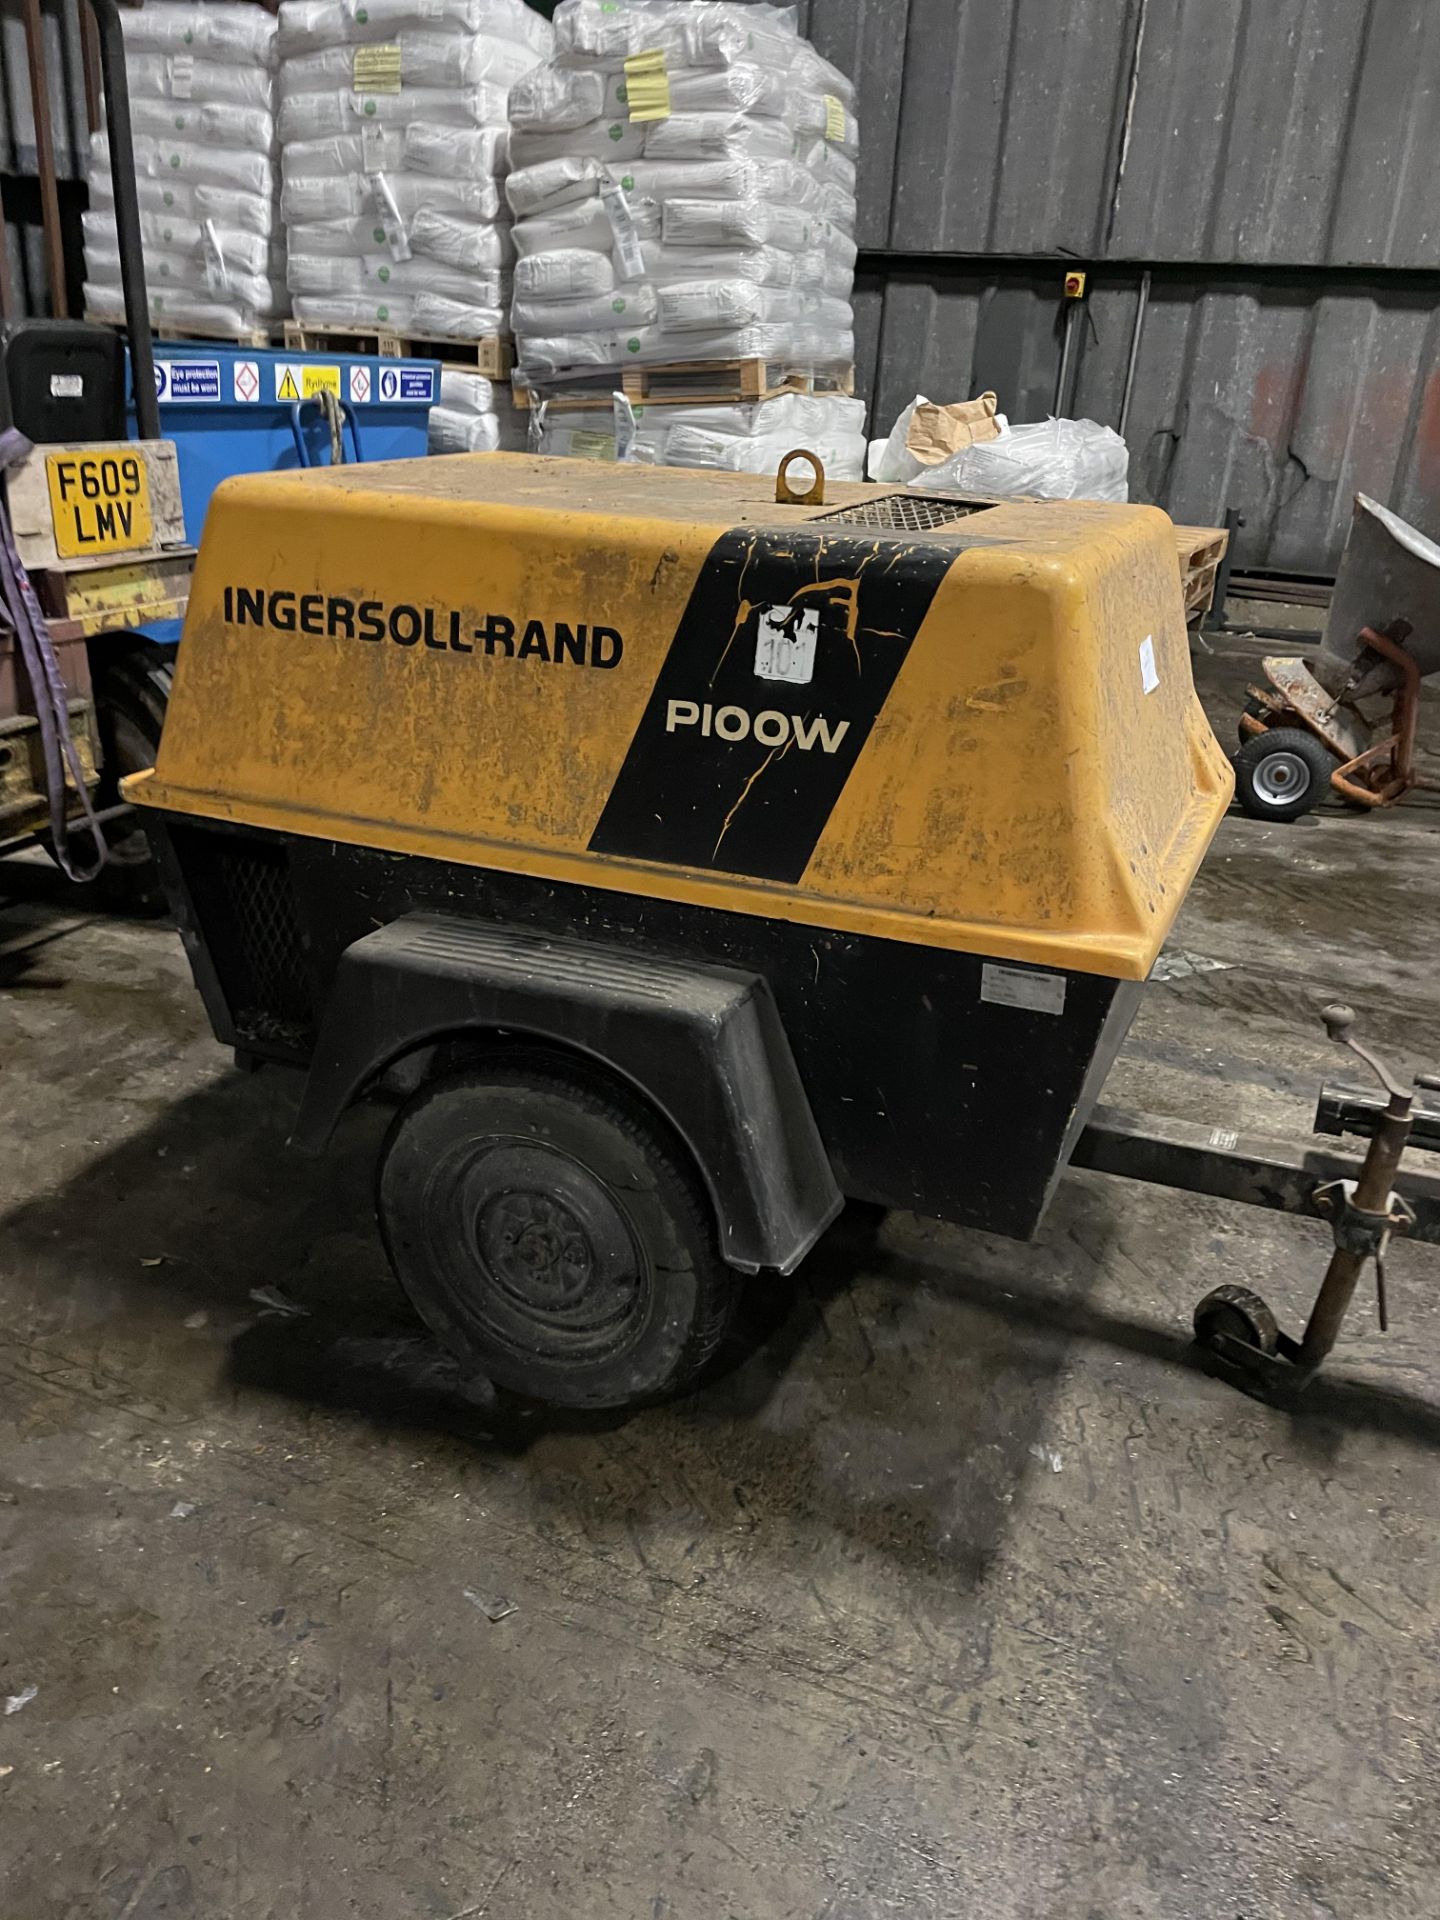 1 Ingersoll-Rand Model P100WD Towable Diesel Air Compressor (2014). Serial No. 910251E89137 with 2 - Image 2 of 5